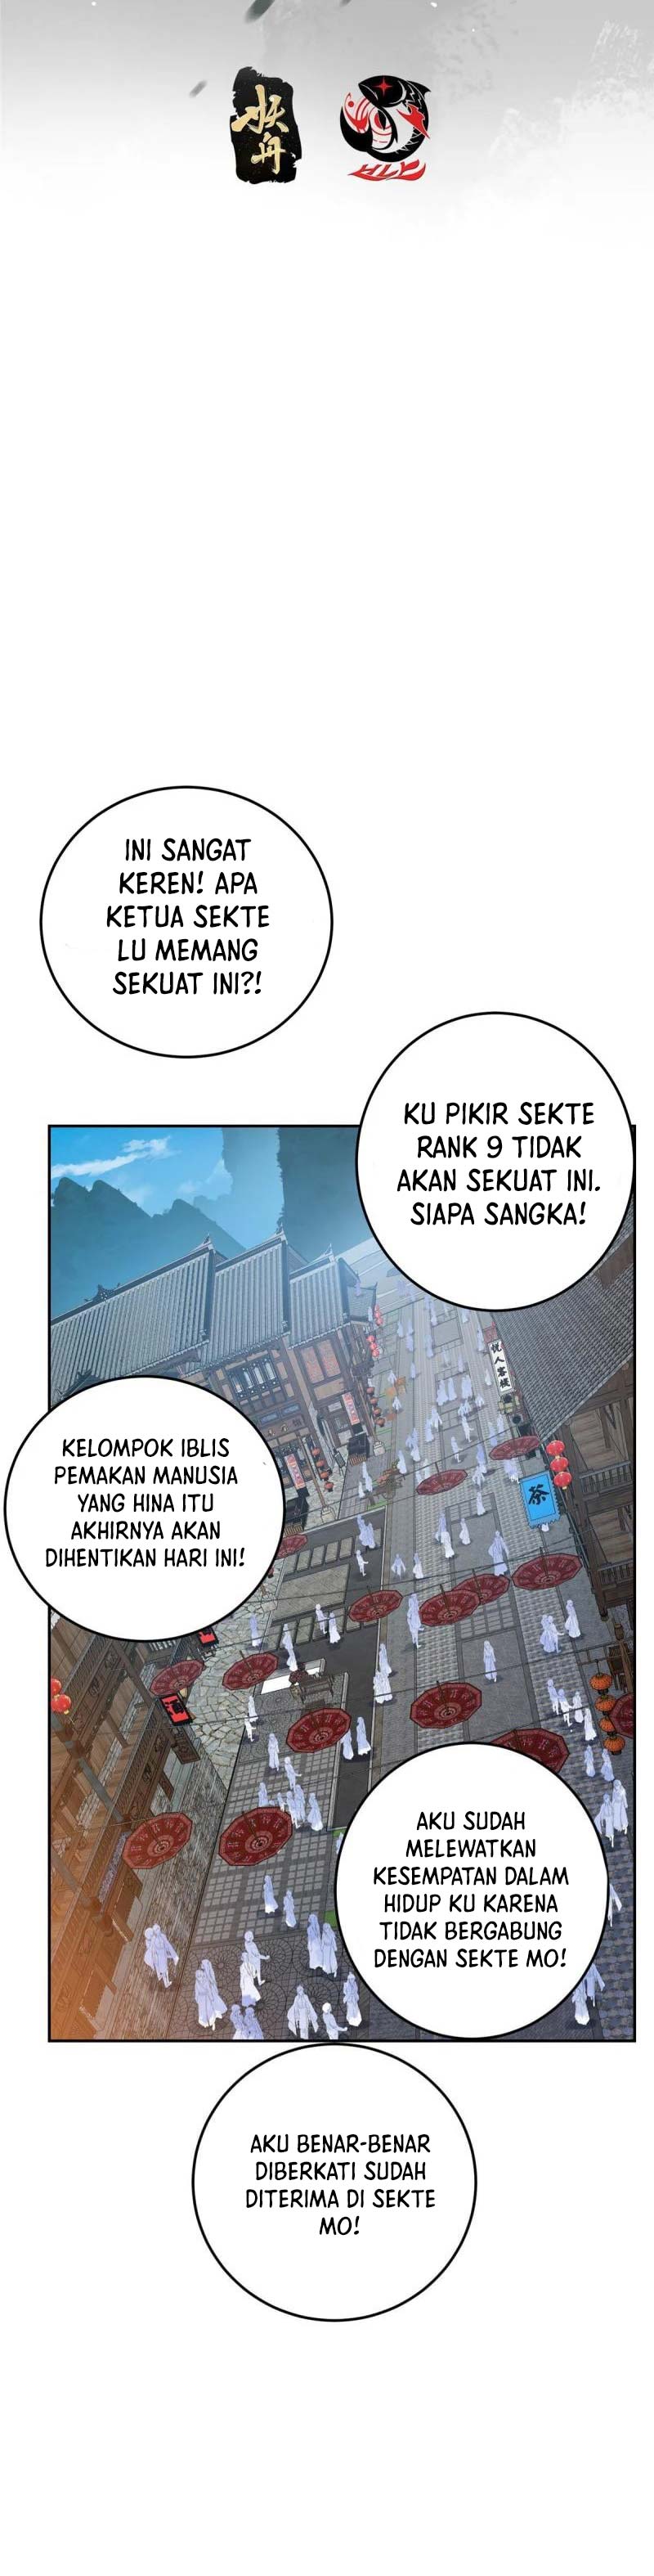 Keep A Low Profile, Sect Leader Chapter 159 Bahasa Indonesia